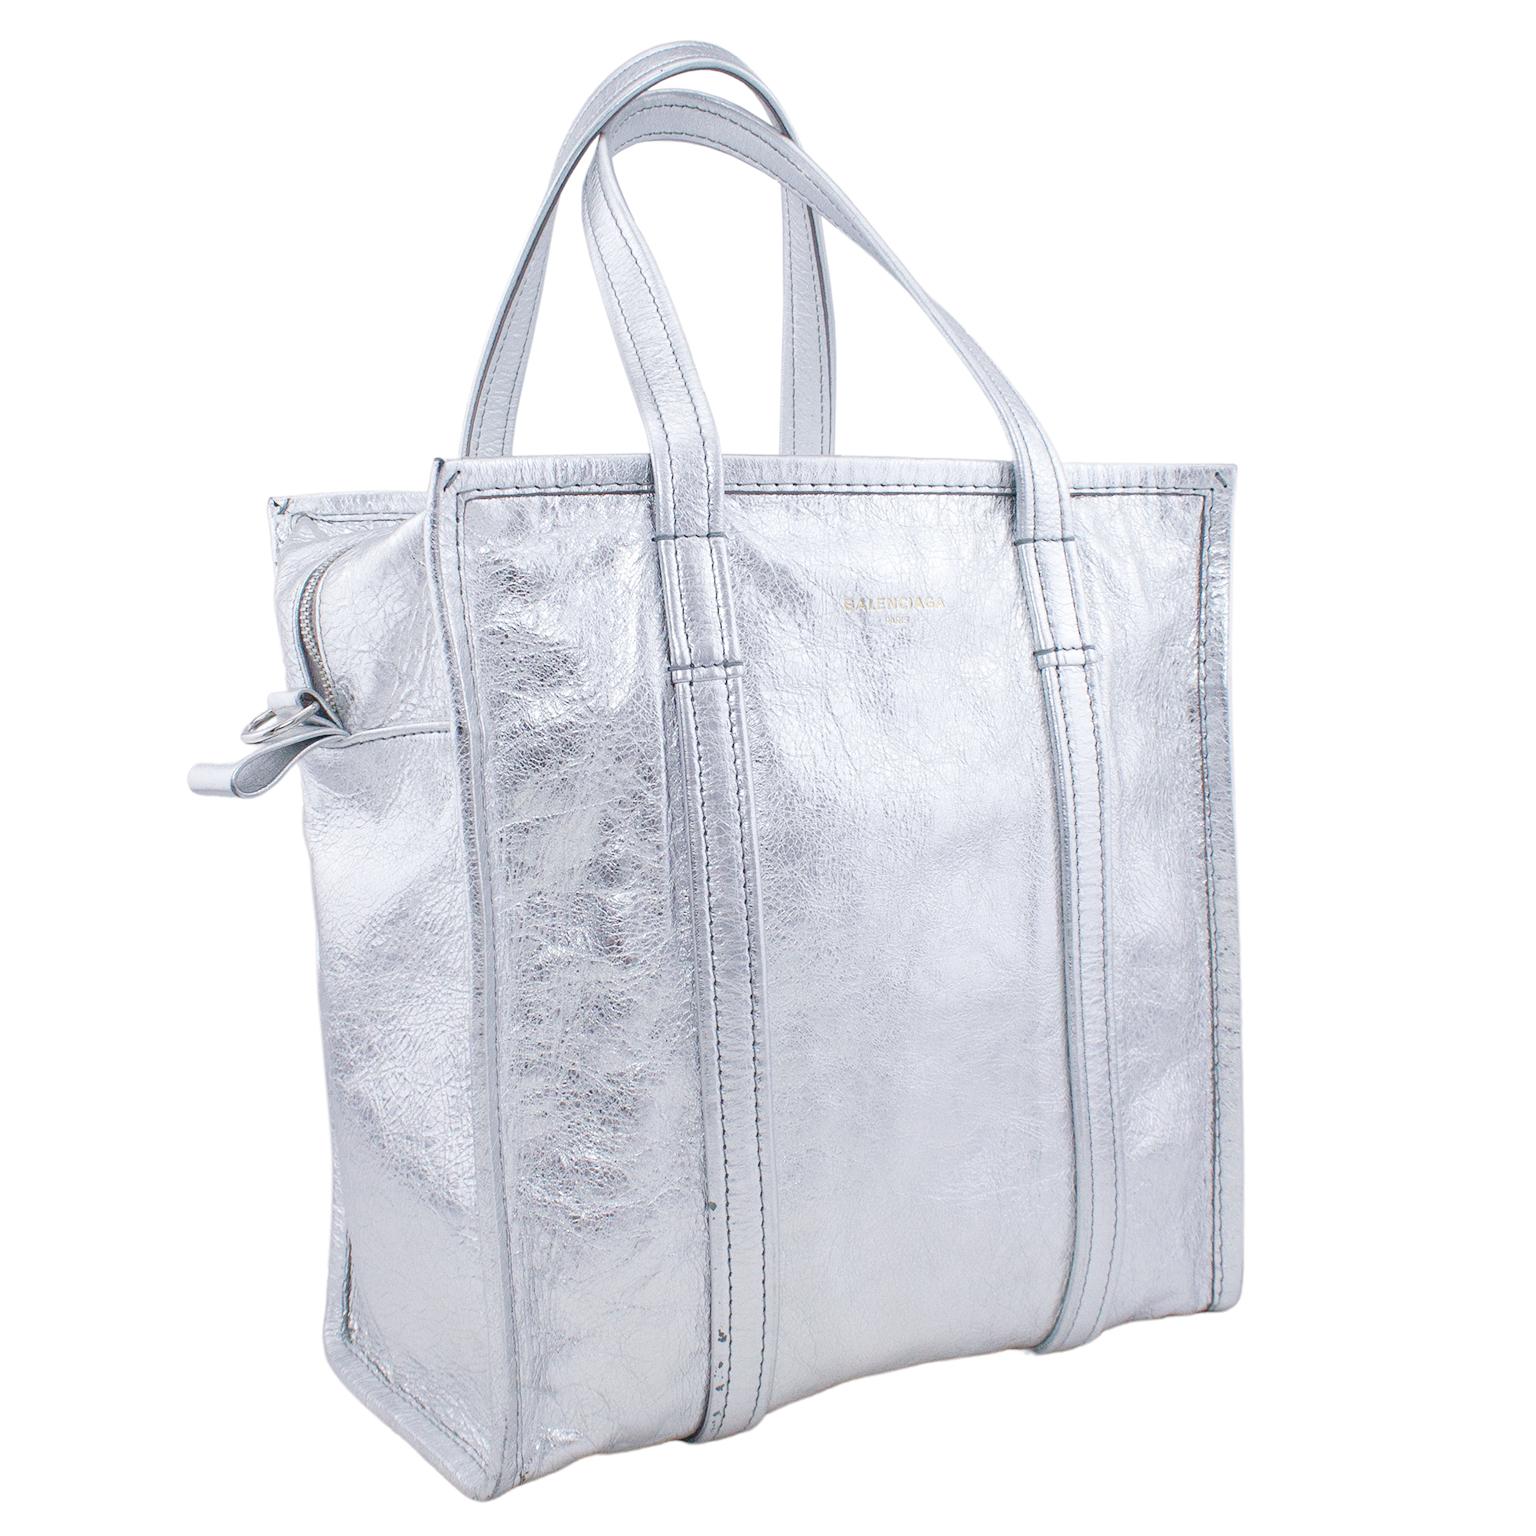 If you’ve been looking for the perfect statement bag to add to your collection, this silver Balenciaga Aaj Bazar Shopper Tote is for you. Made out of an aluminum-esque, 100% leather, the square-shaped tote is a minimal yet eye-catching statement